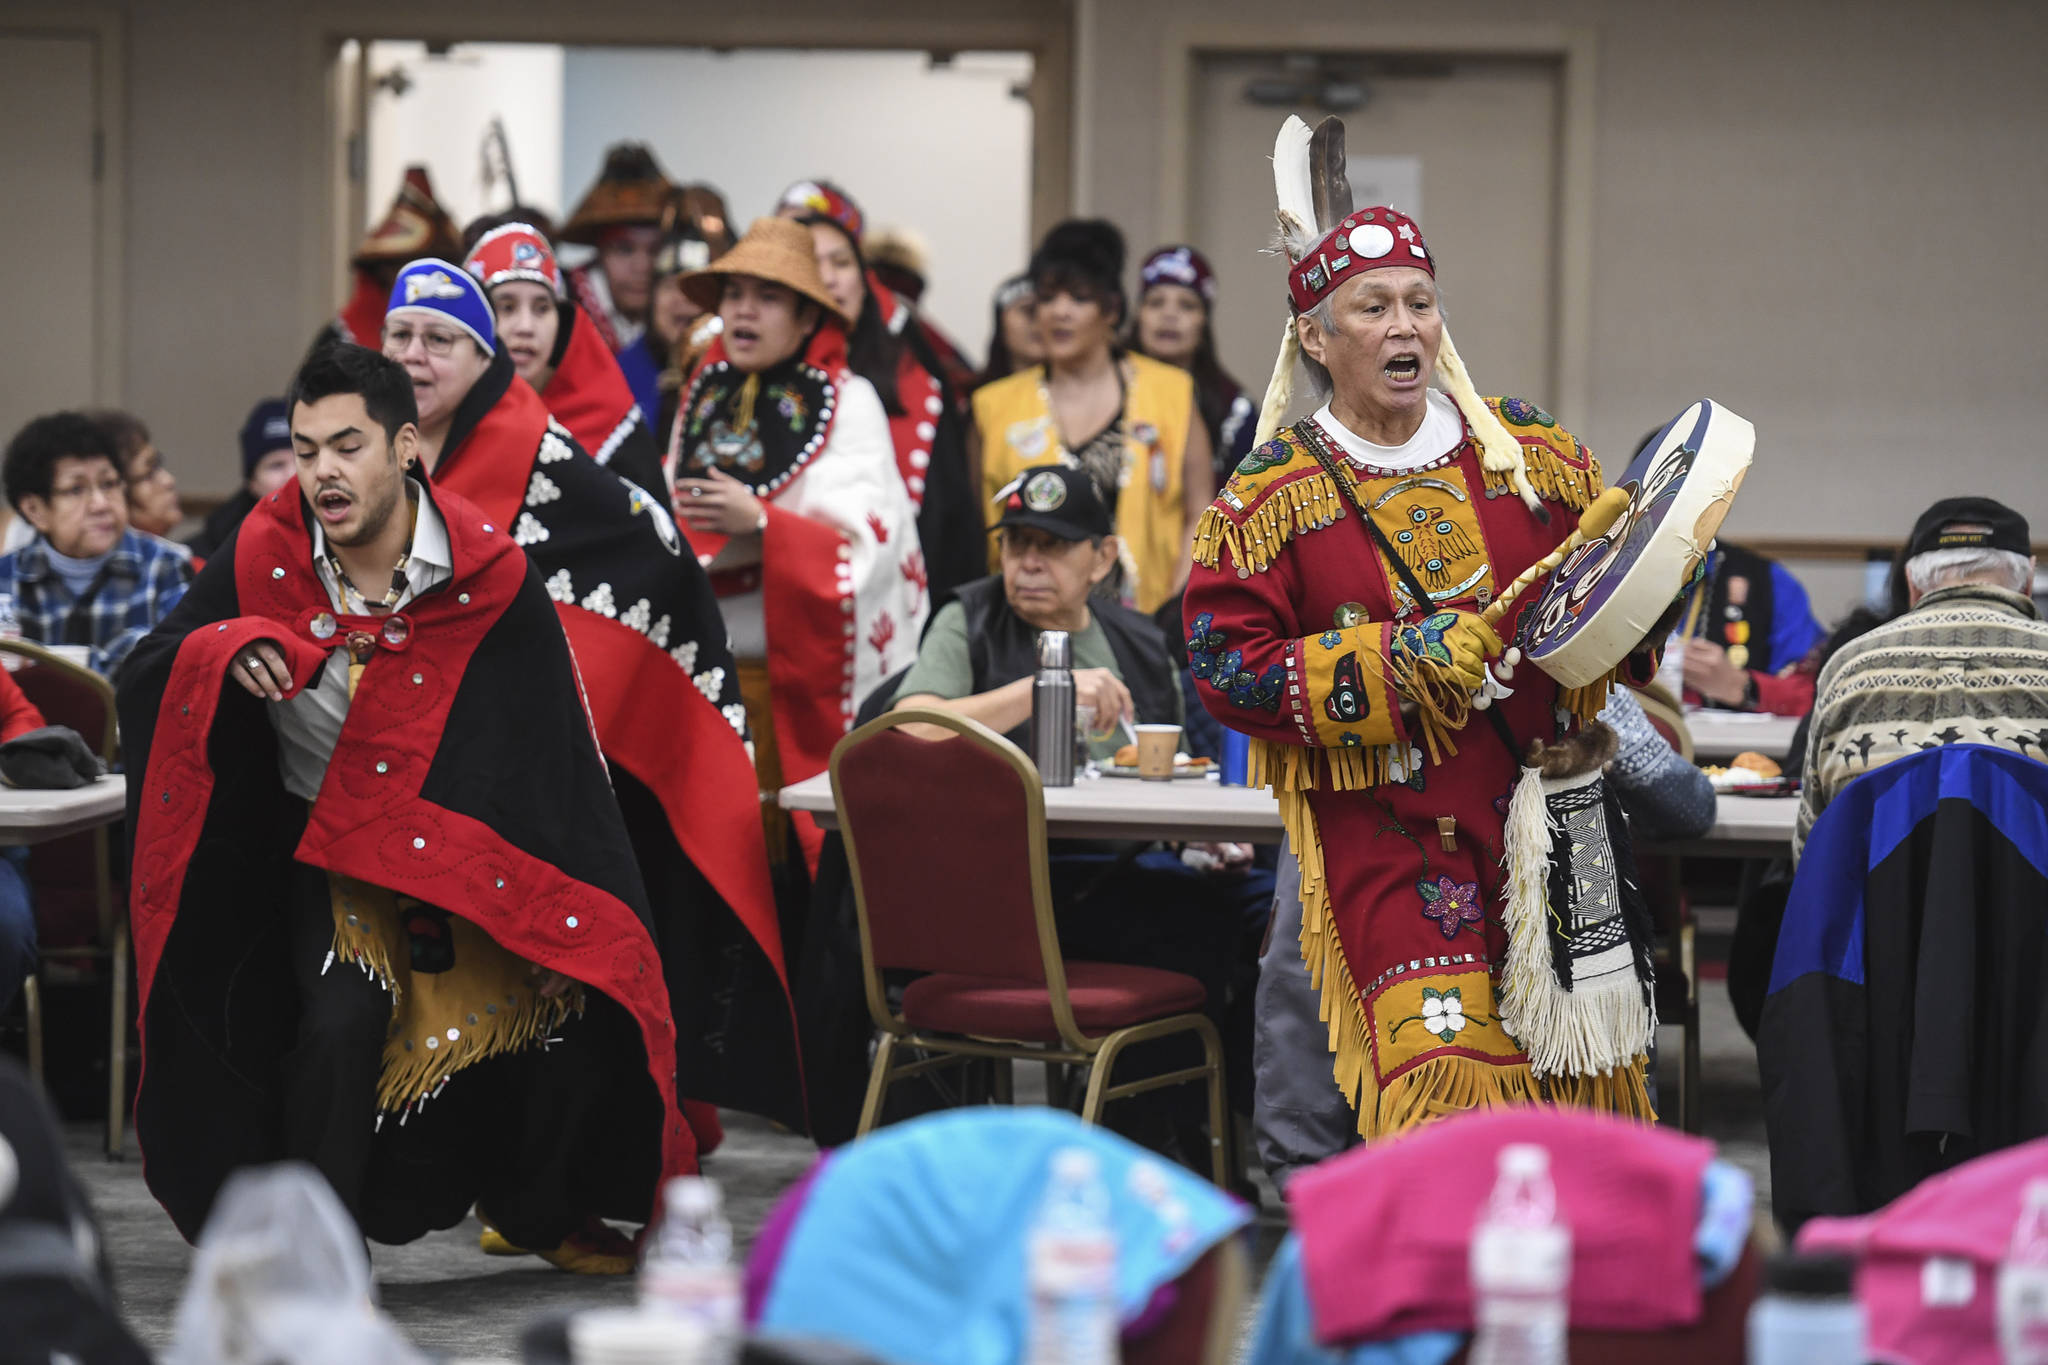 The Yaaw Tei Yi Dance Group performs during the Southeast Alaska Native Veteran’s Veterans Day luncheon at the Elizabeth Peratrovich Hall on Monday, Nov. 11, 2019. (Michael Penn | Juneau Empire)